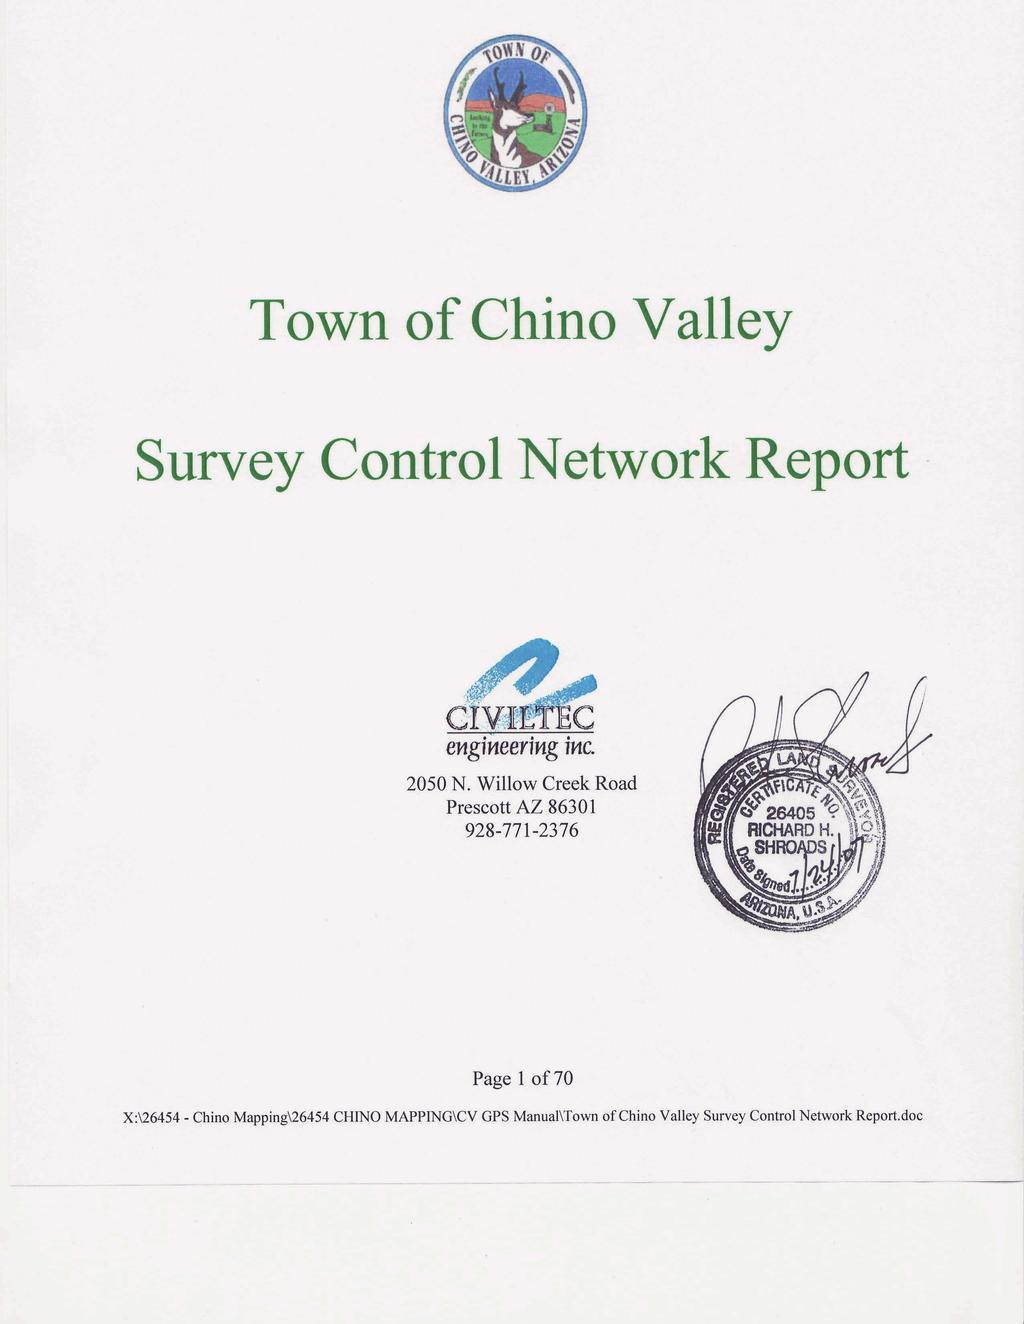 Town of Chino Valley Survey Control Network Report mgfneerhg mc.